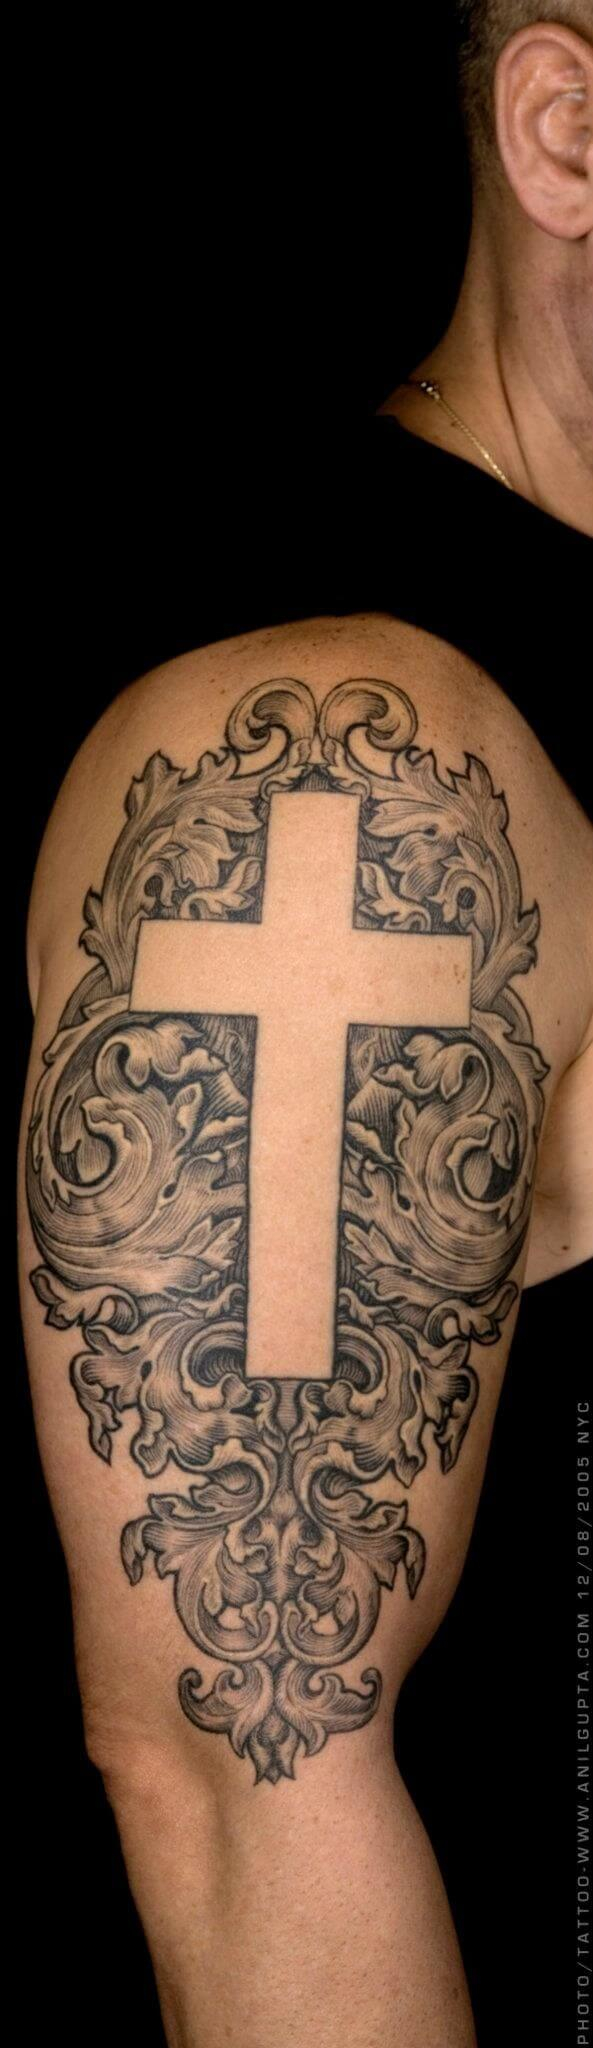 56 Best Cross Tattoos For Men Improb within size 593 X 2048